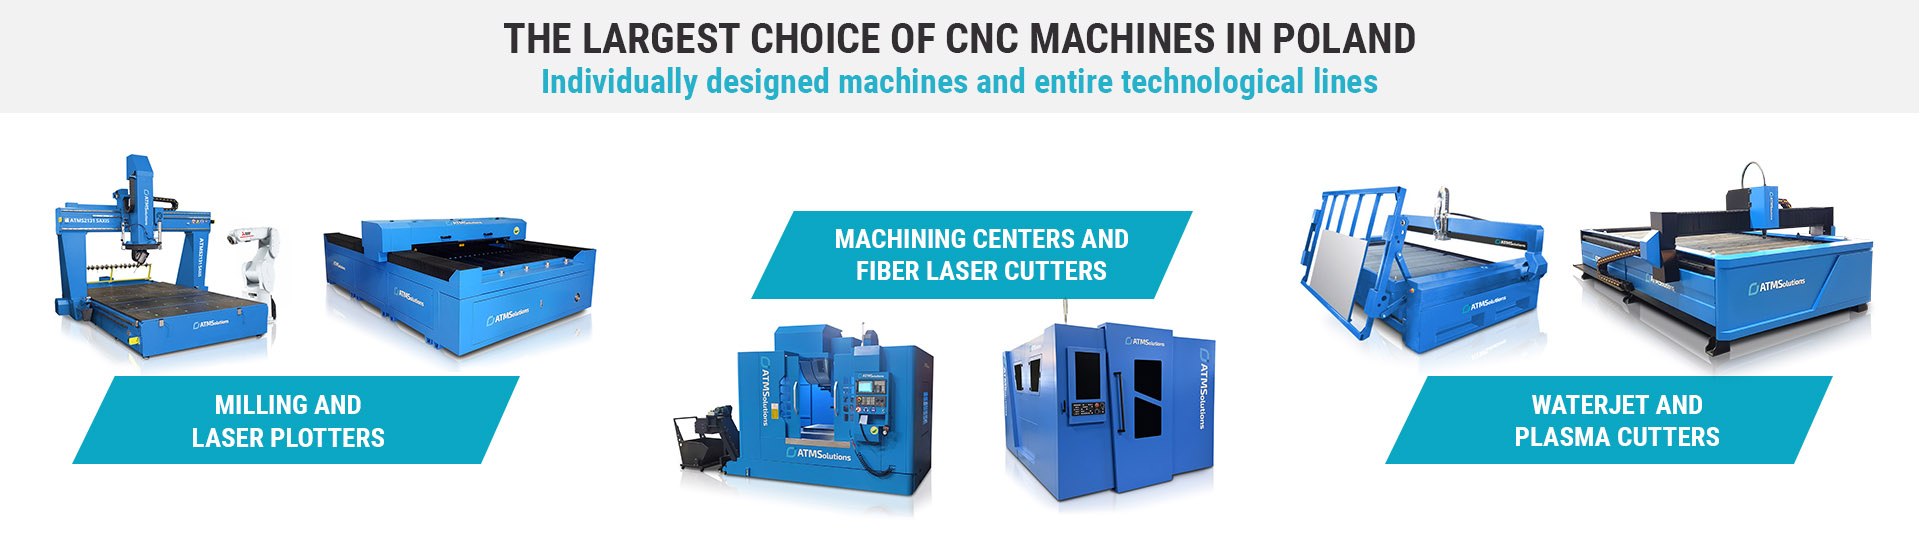 The largest selection of CNC machines in Poland